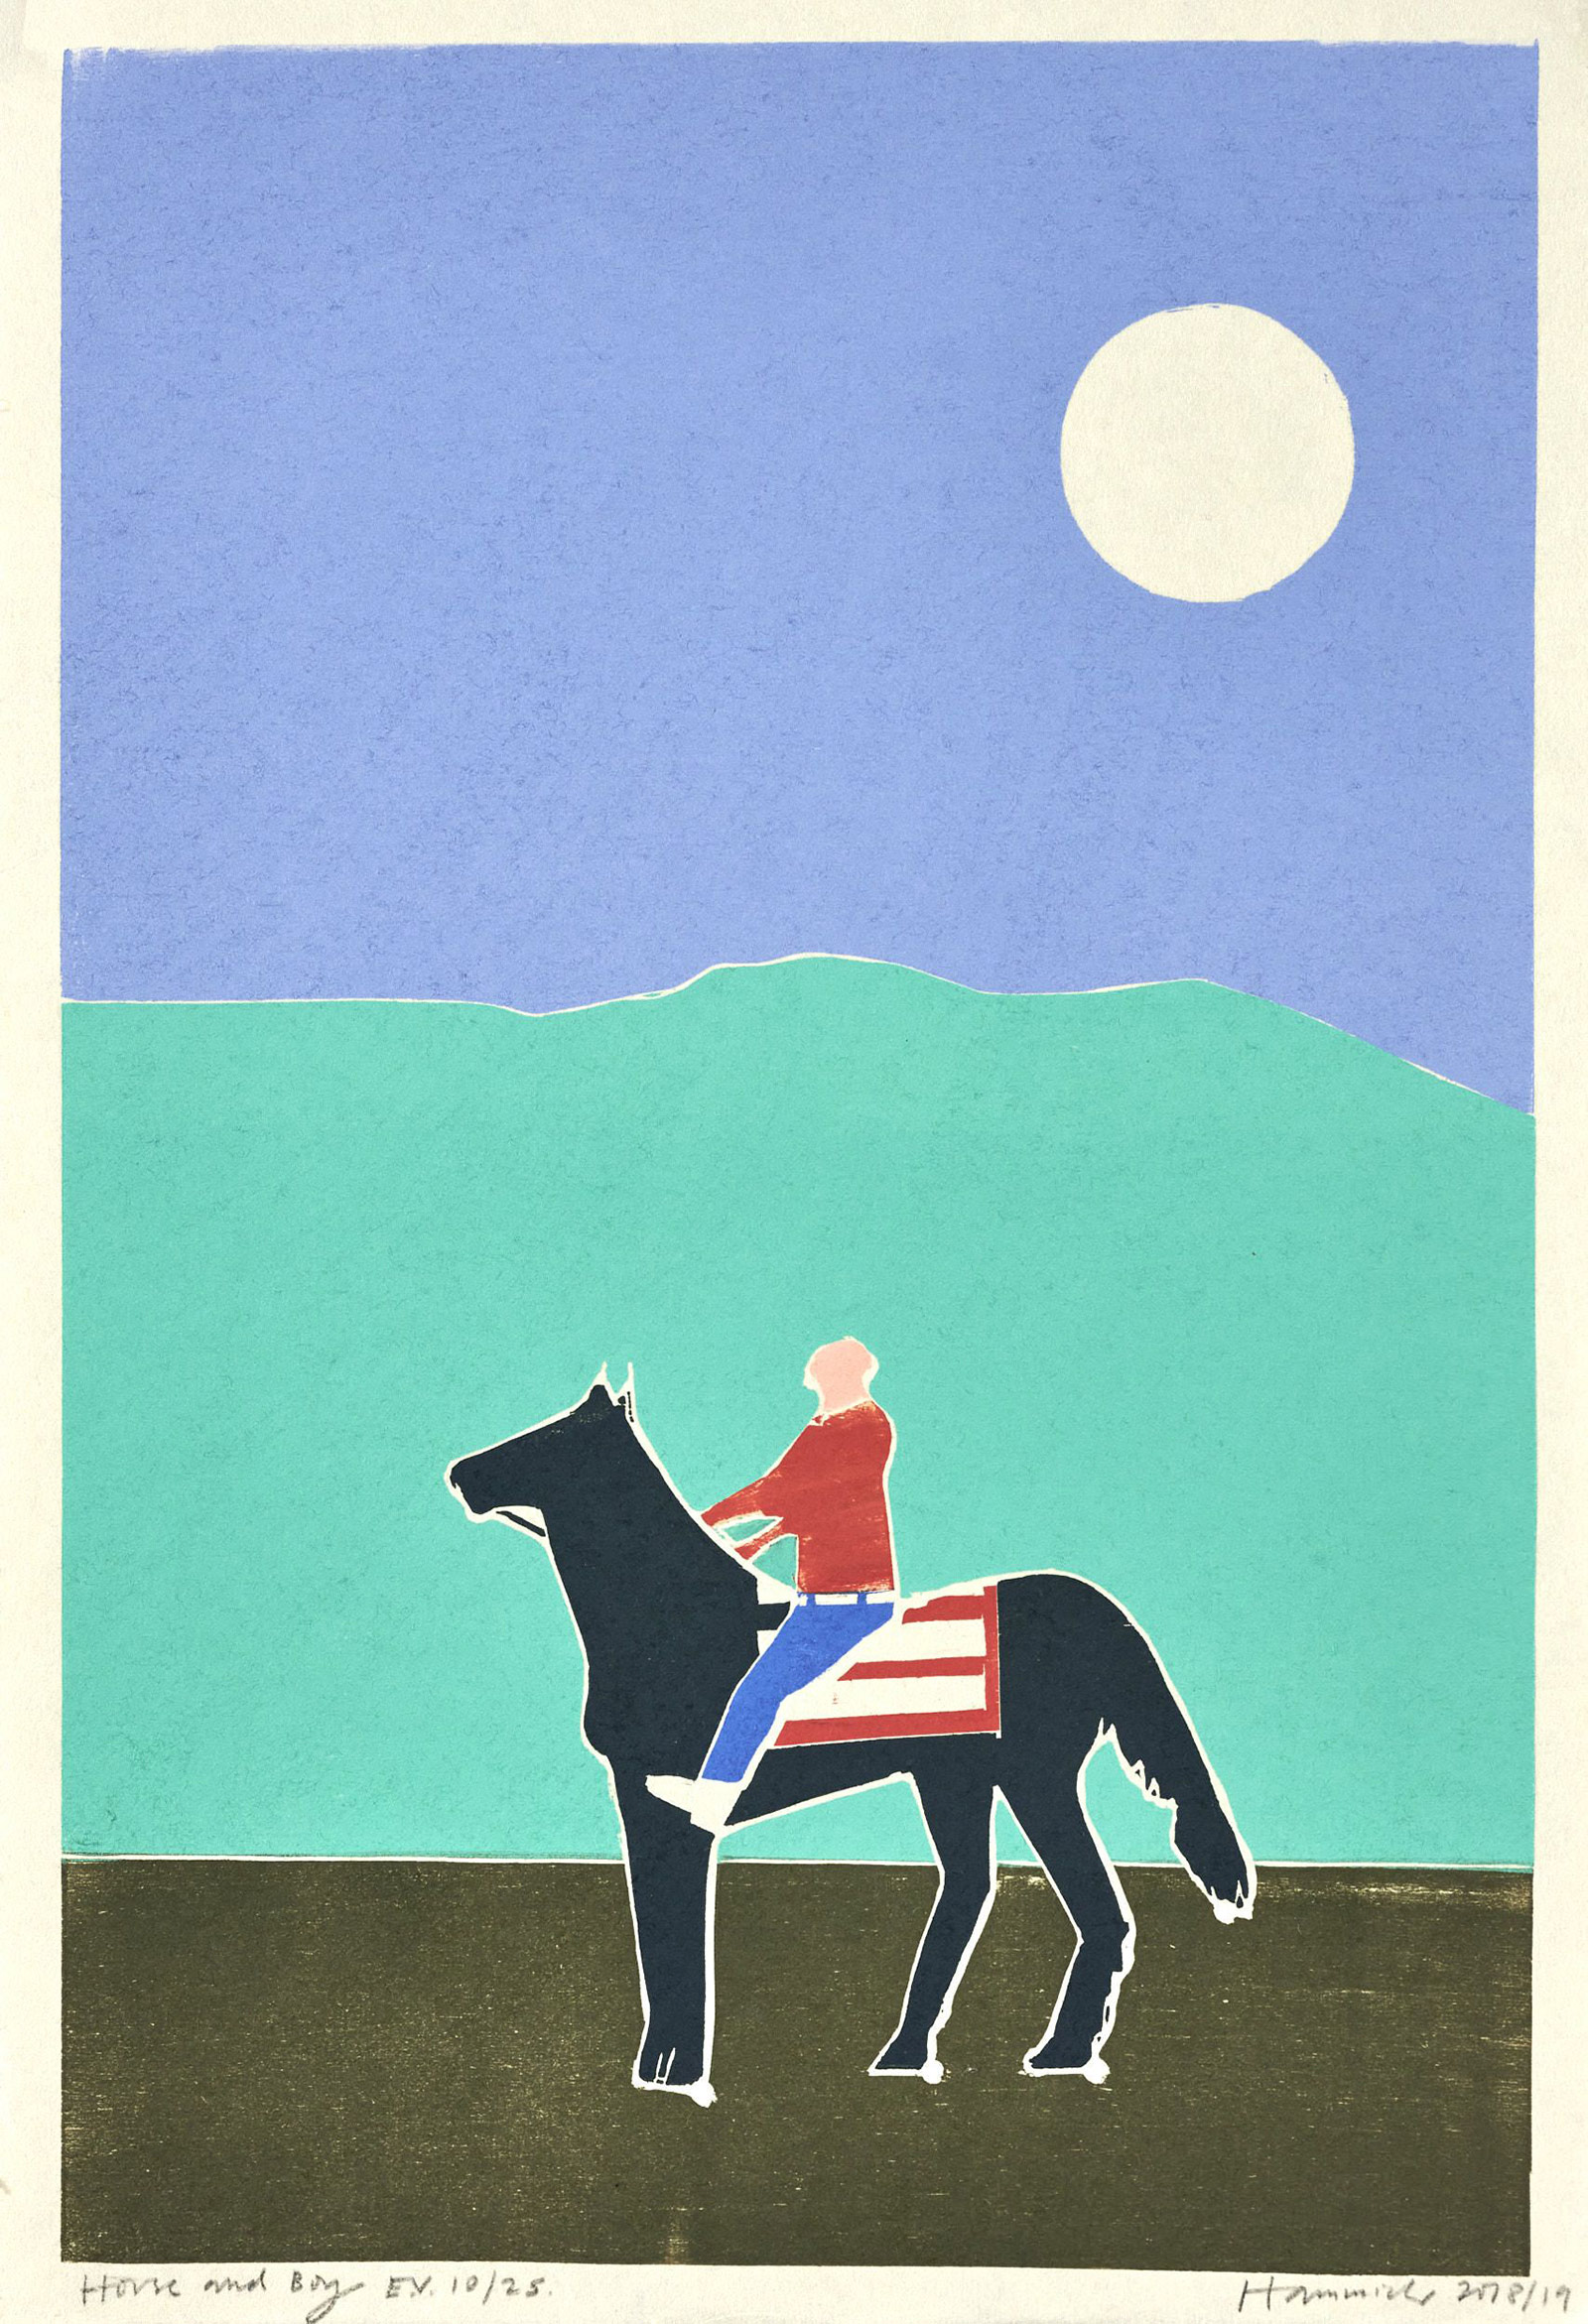 Horse and boy by Tom Hammick